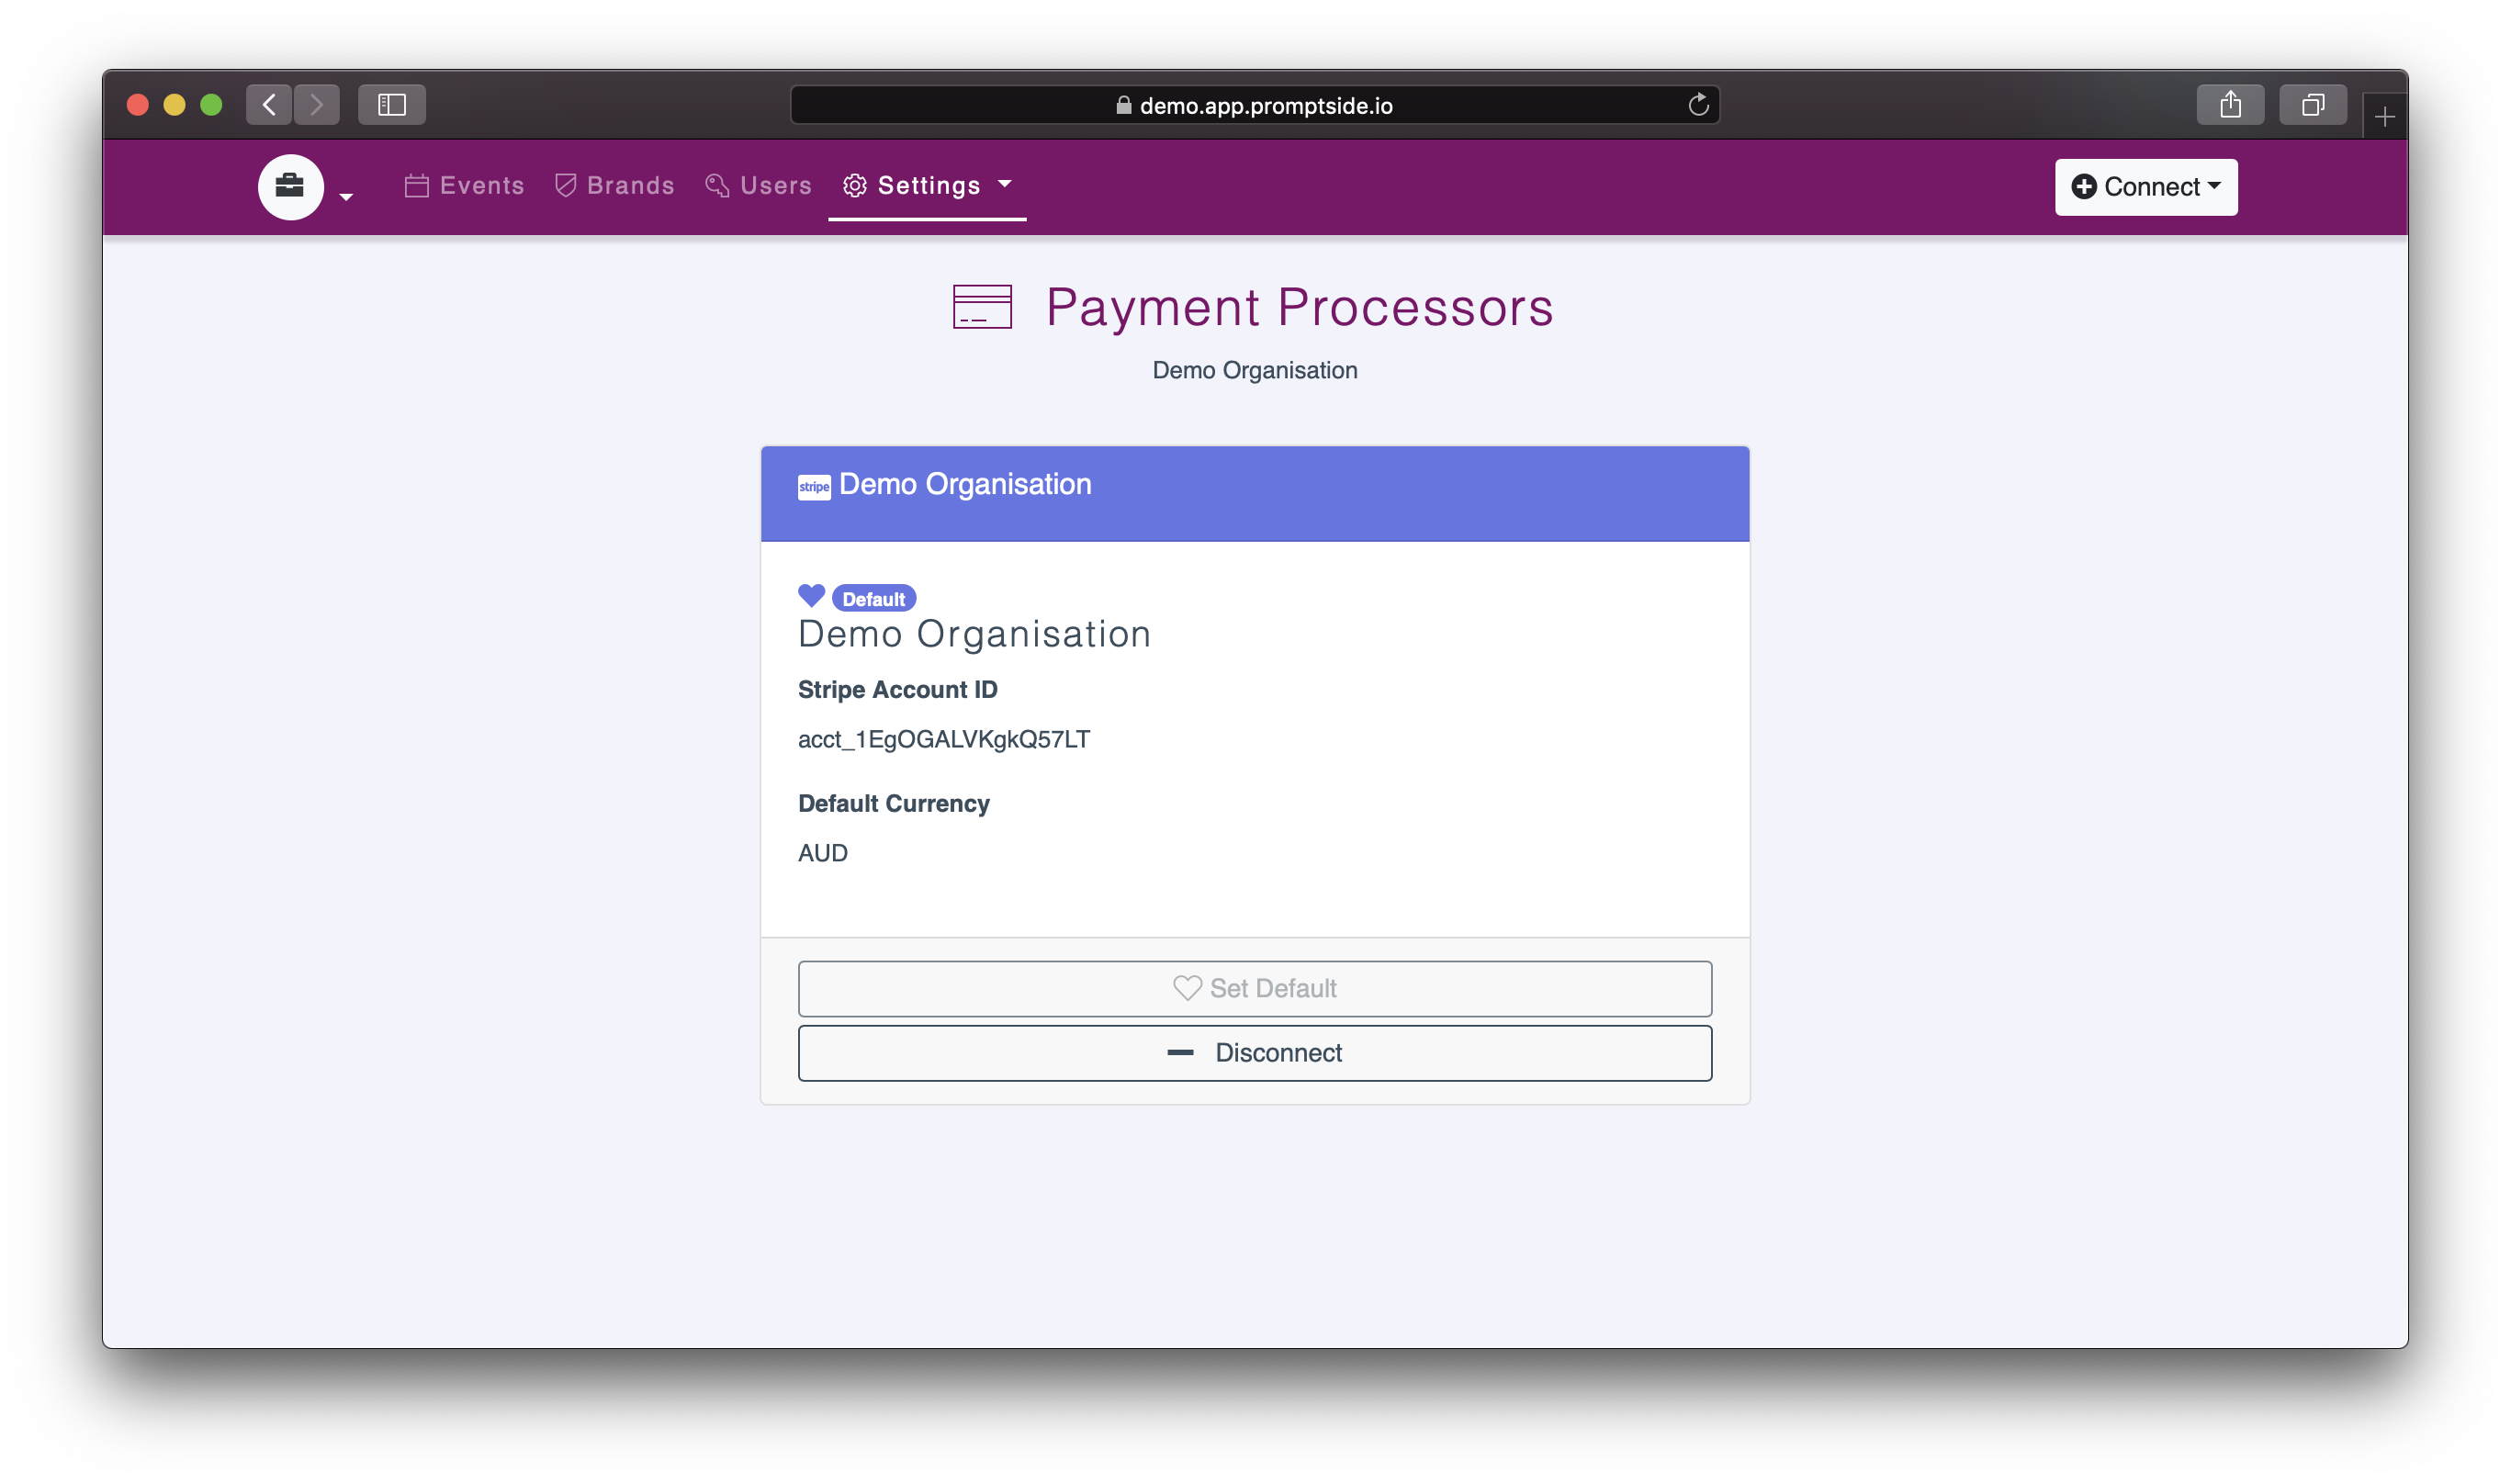 Screenshot of a dashboard showing a connected payment processor, Stripe.